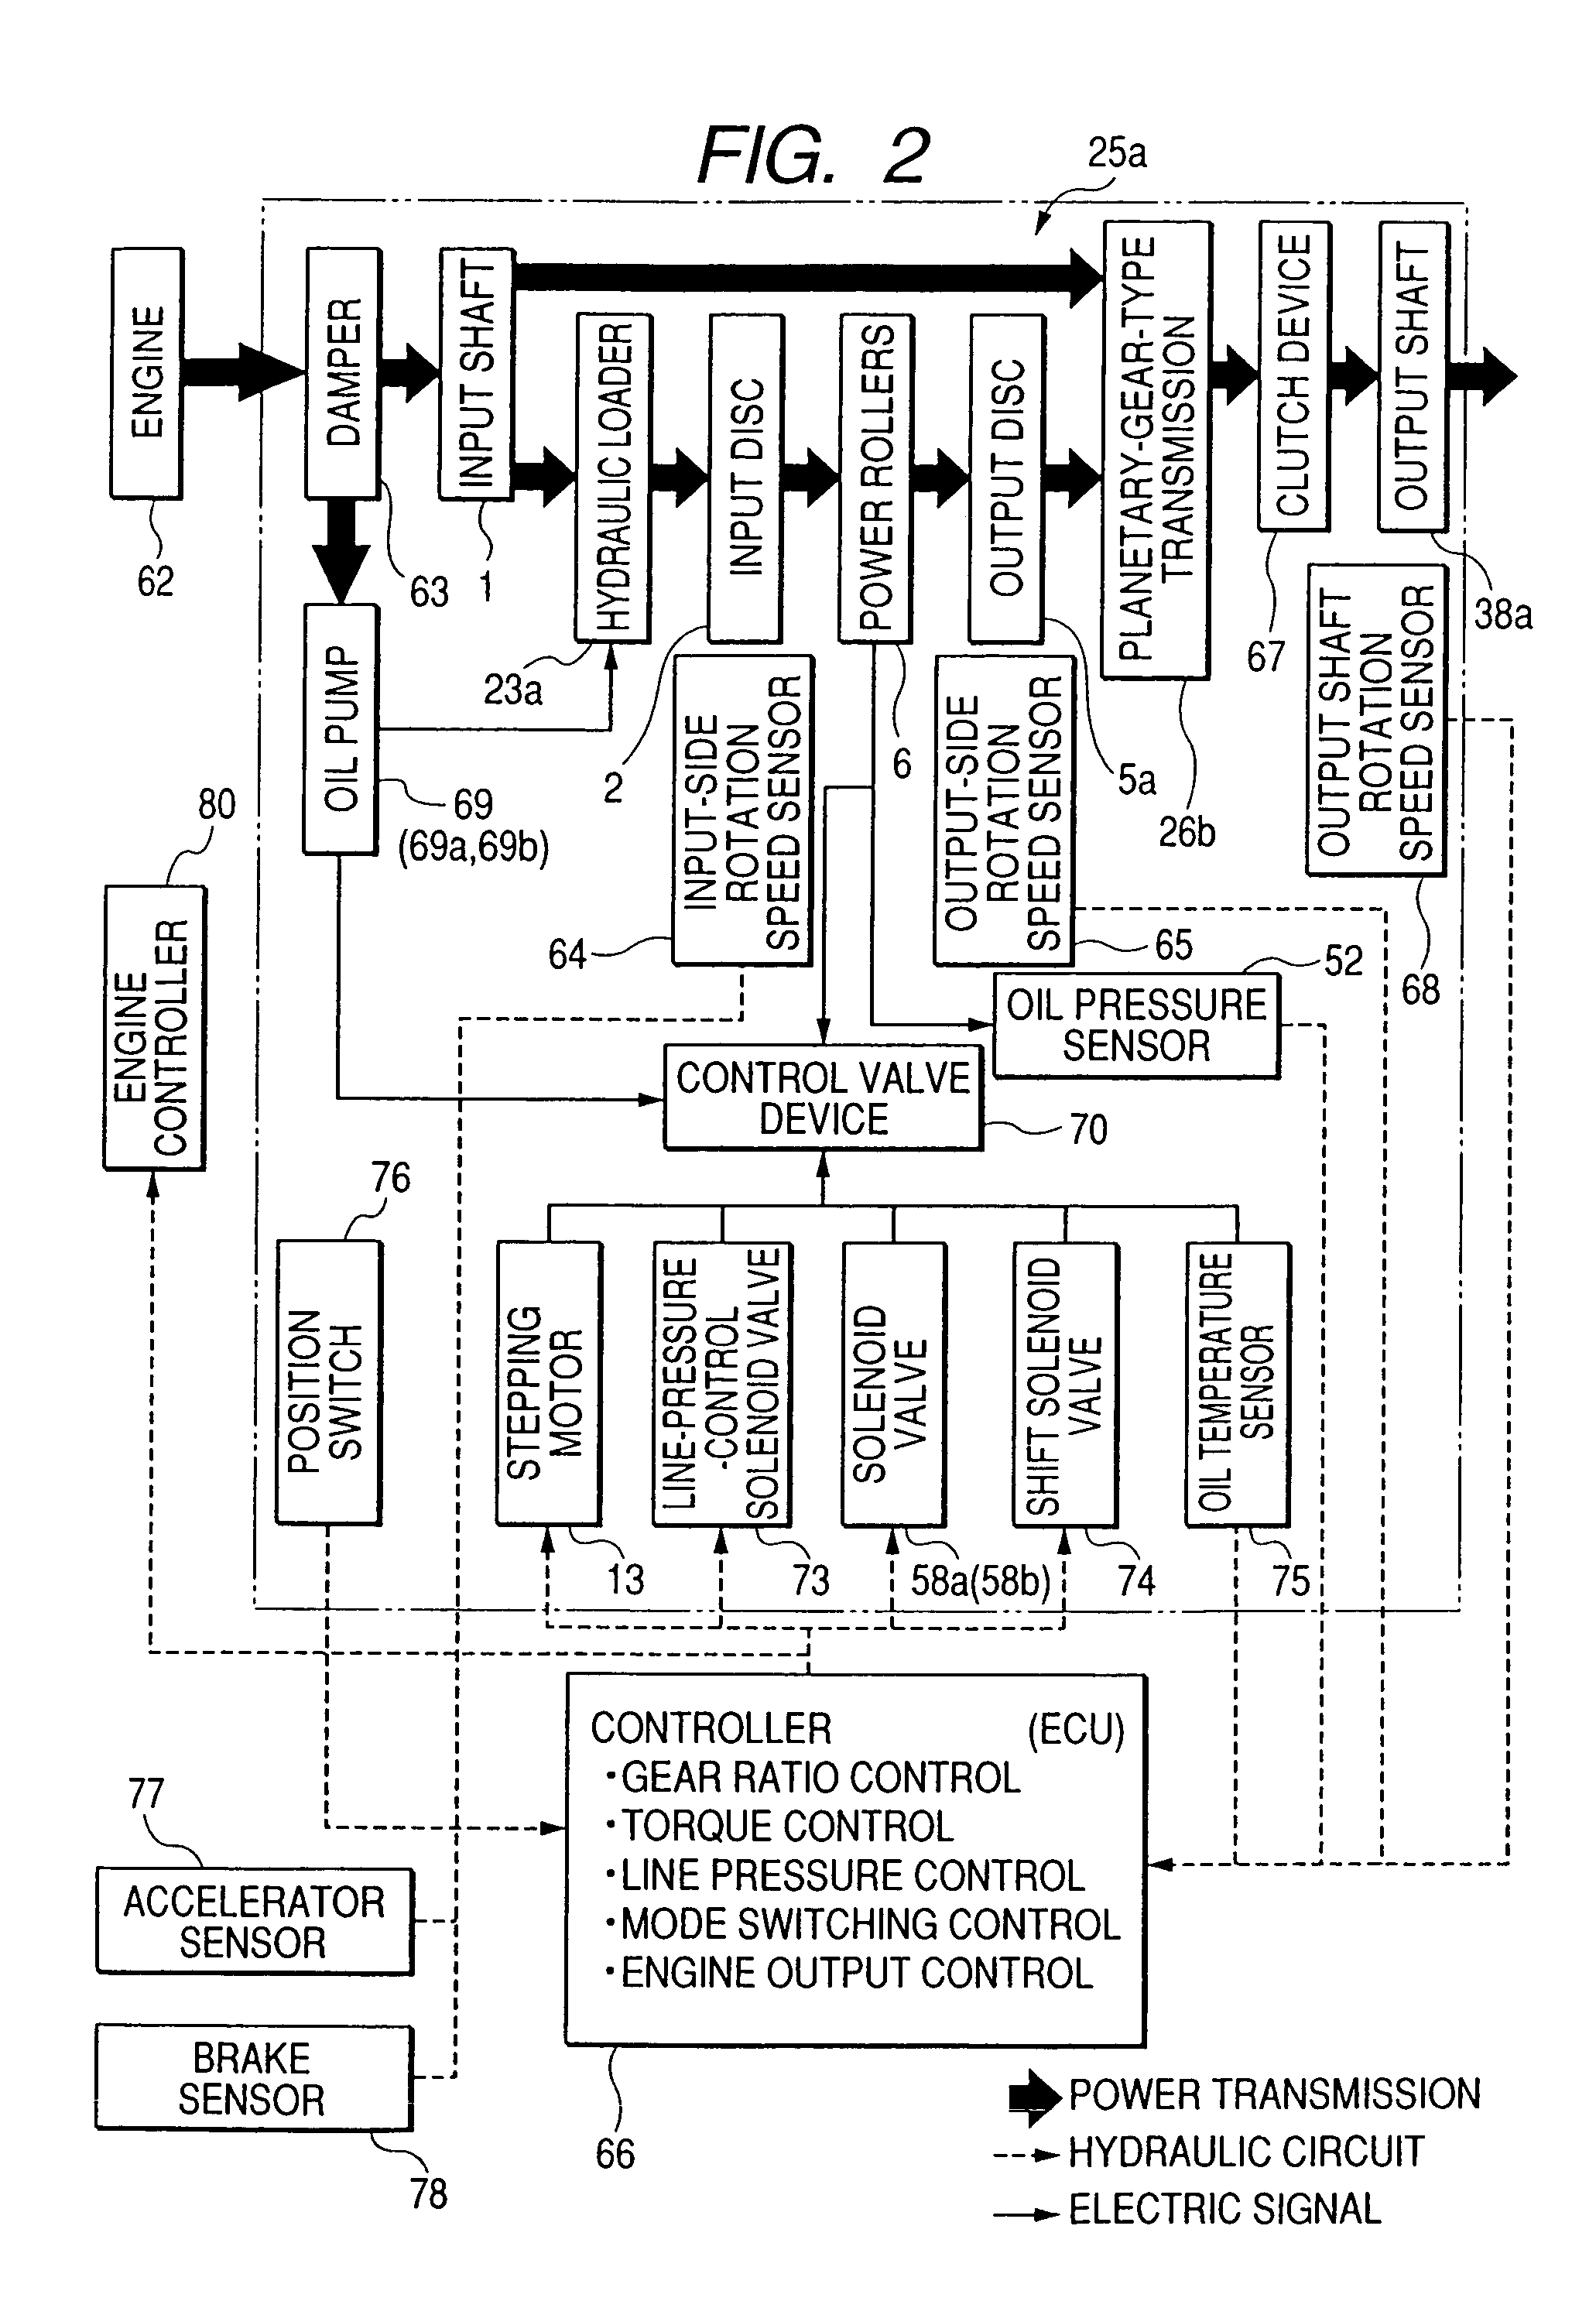 Continuously variable transmission apparatus